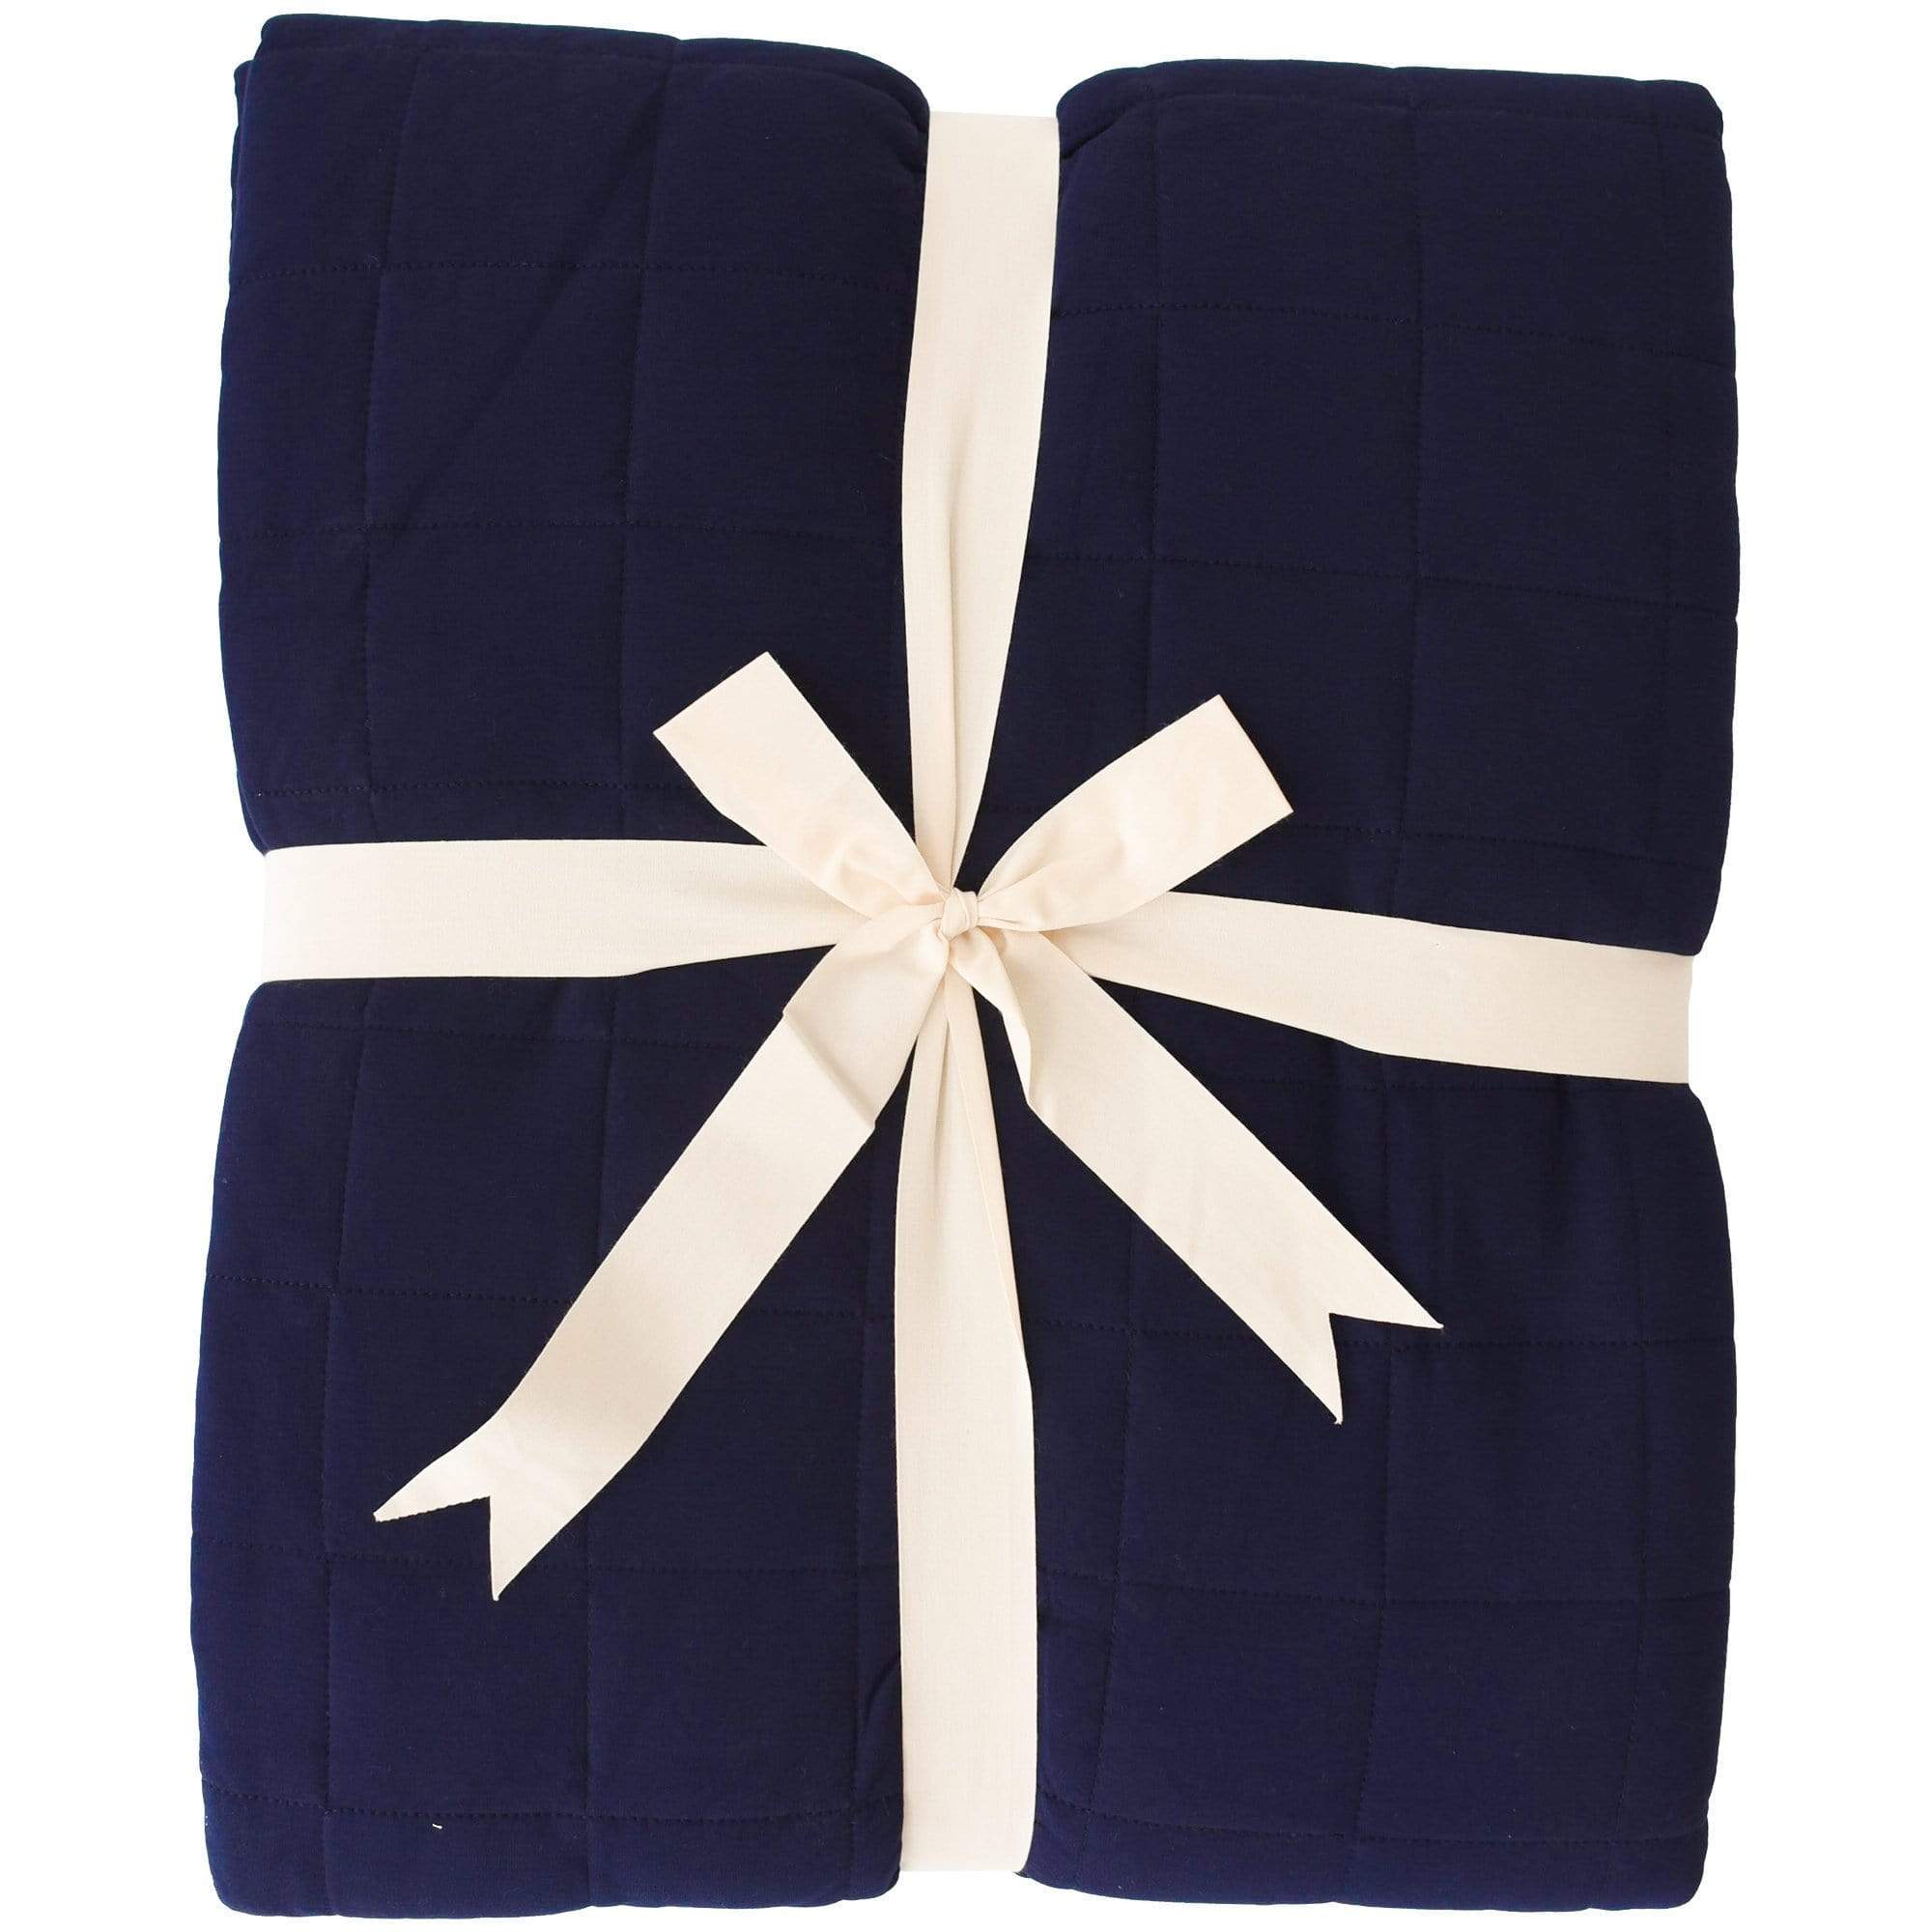 Kyte BABY Blanket Navy / Adult / 2.5 Tog Adult Quilted Blanket in Navy